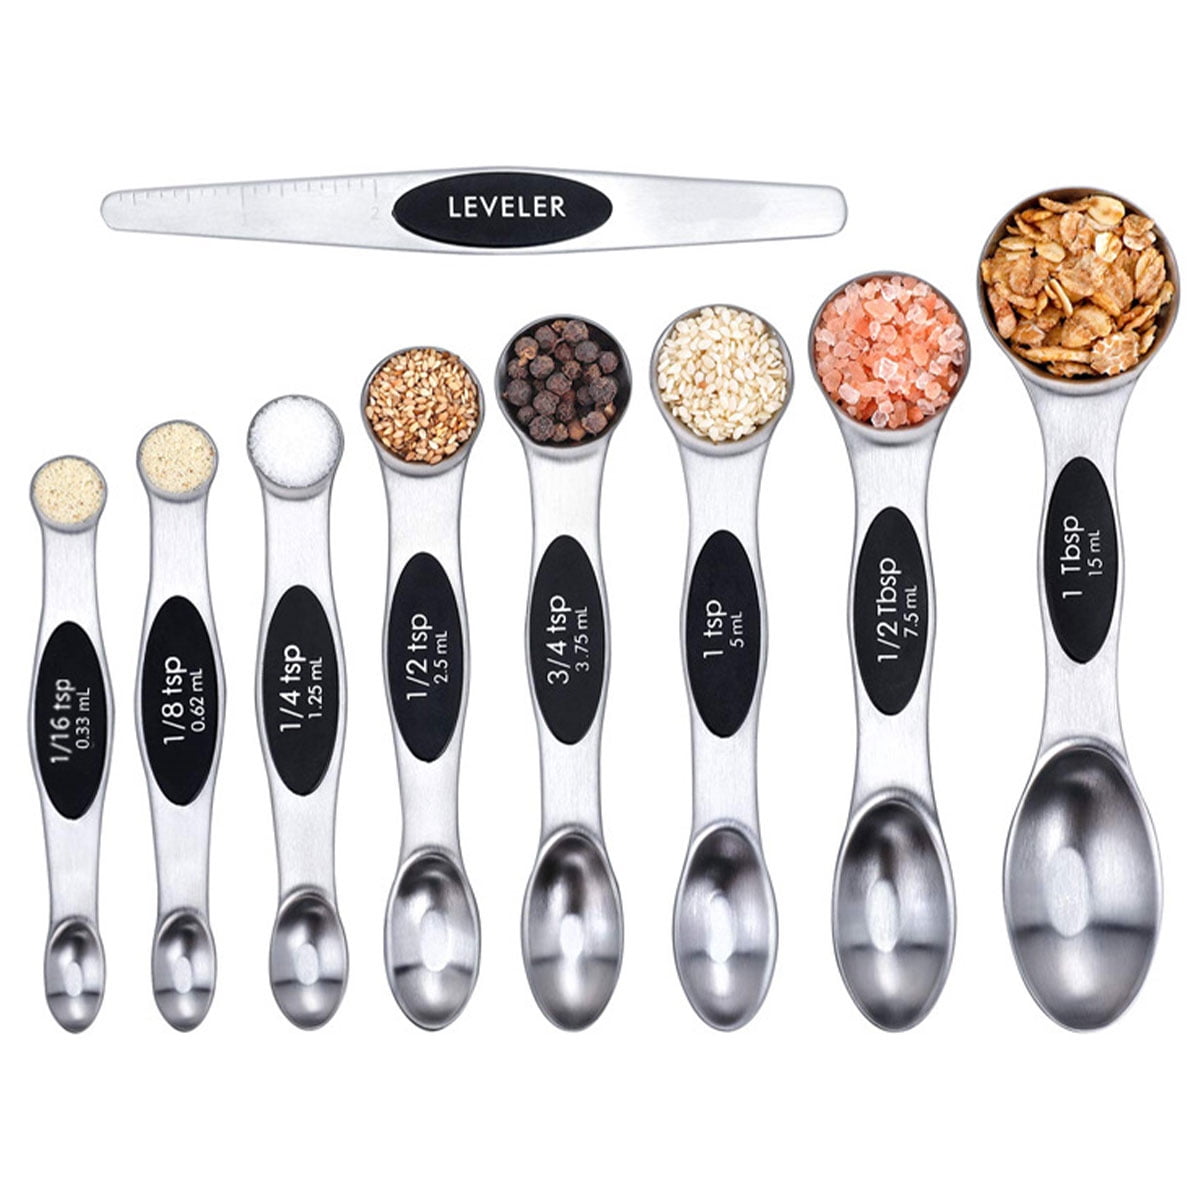 MINGYU Set of 6 Measuring Spoons, Square Stainless Stee Teaspoons Measuring Spoon with Accurate Measurement Markings and Removable Clasp for